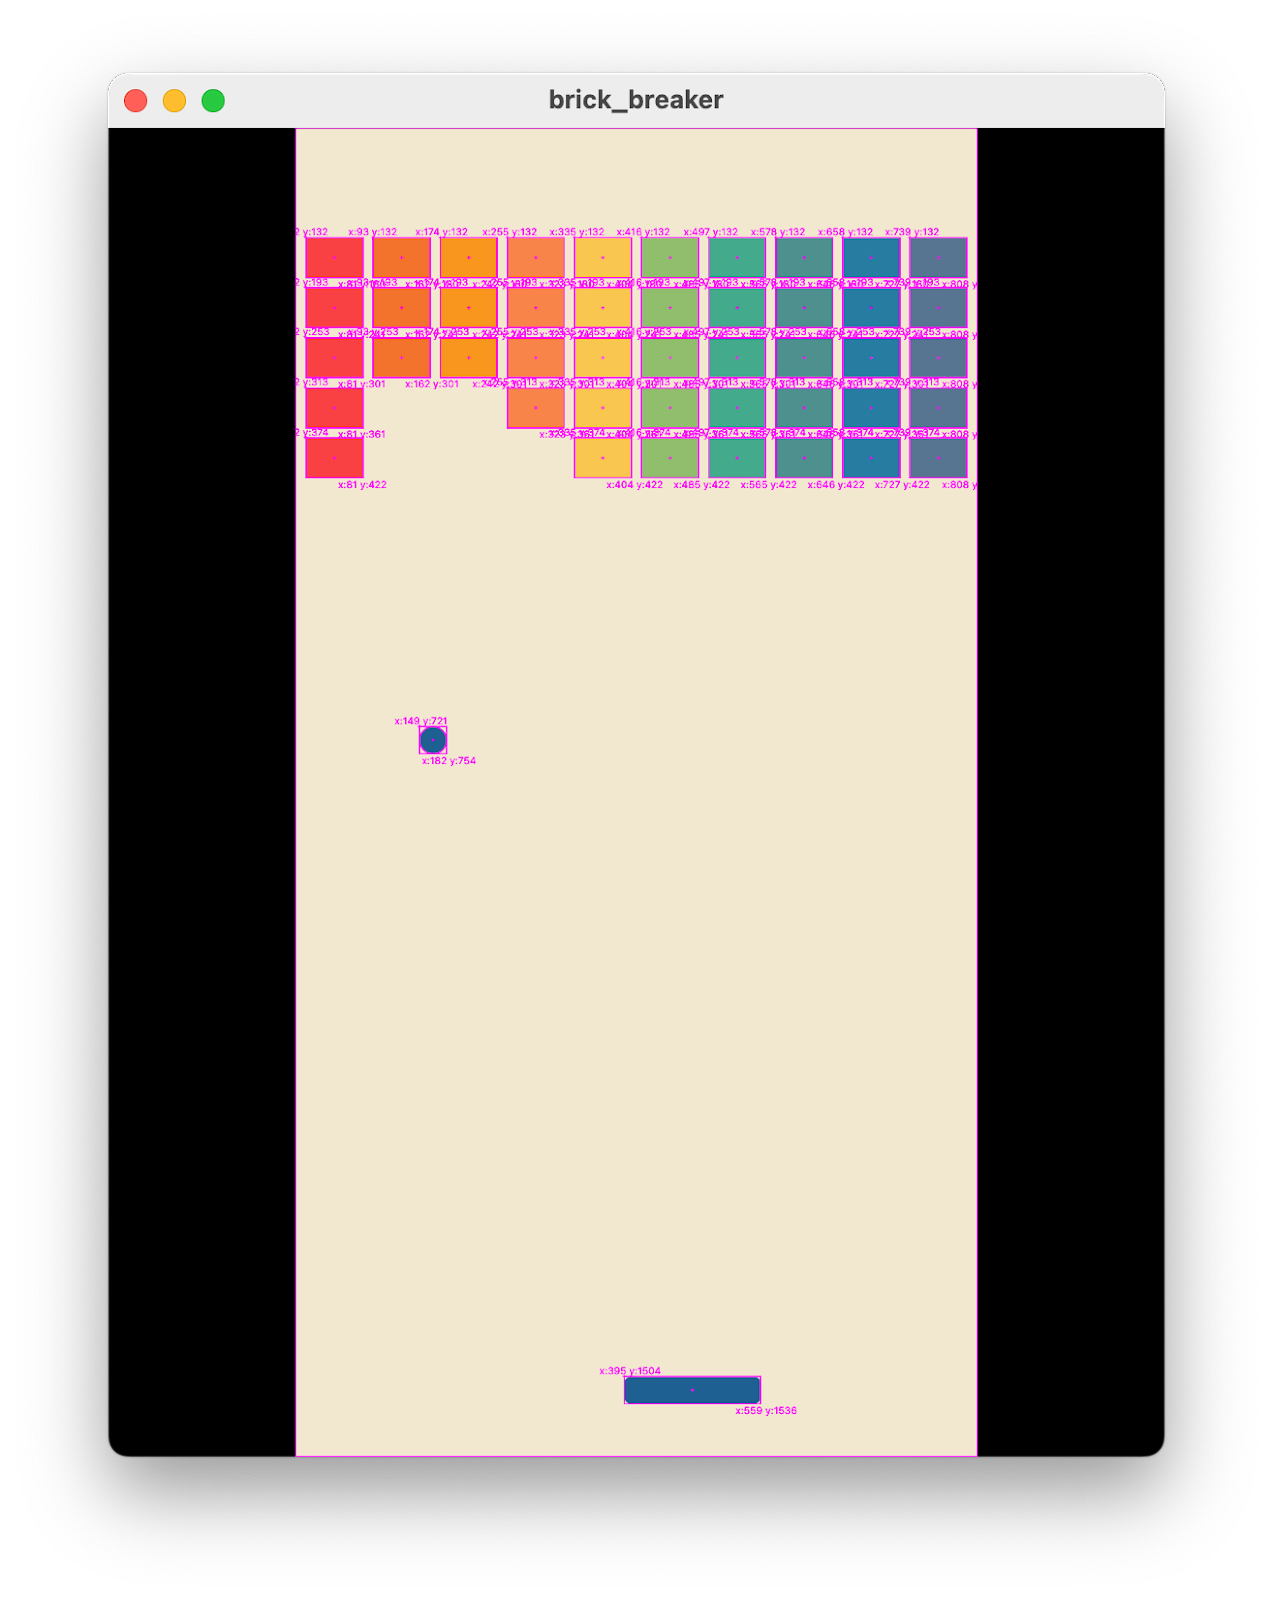 A screen shot showing brick_breaker with ball, bat, and most of the bricks on the playing area. Each of the components has debugging labels